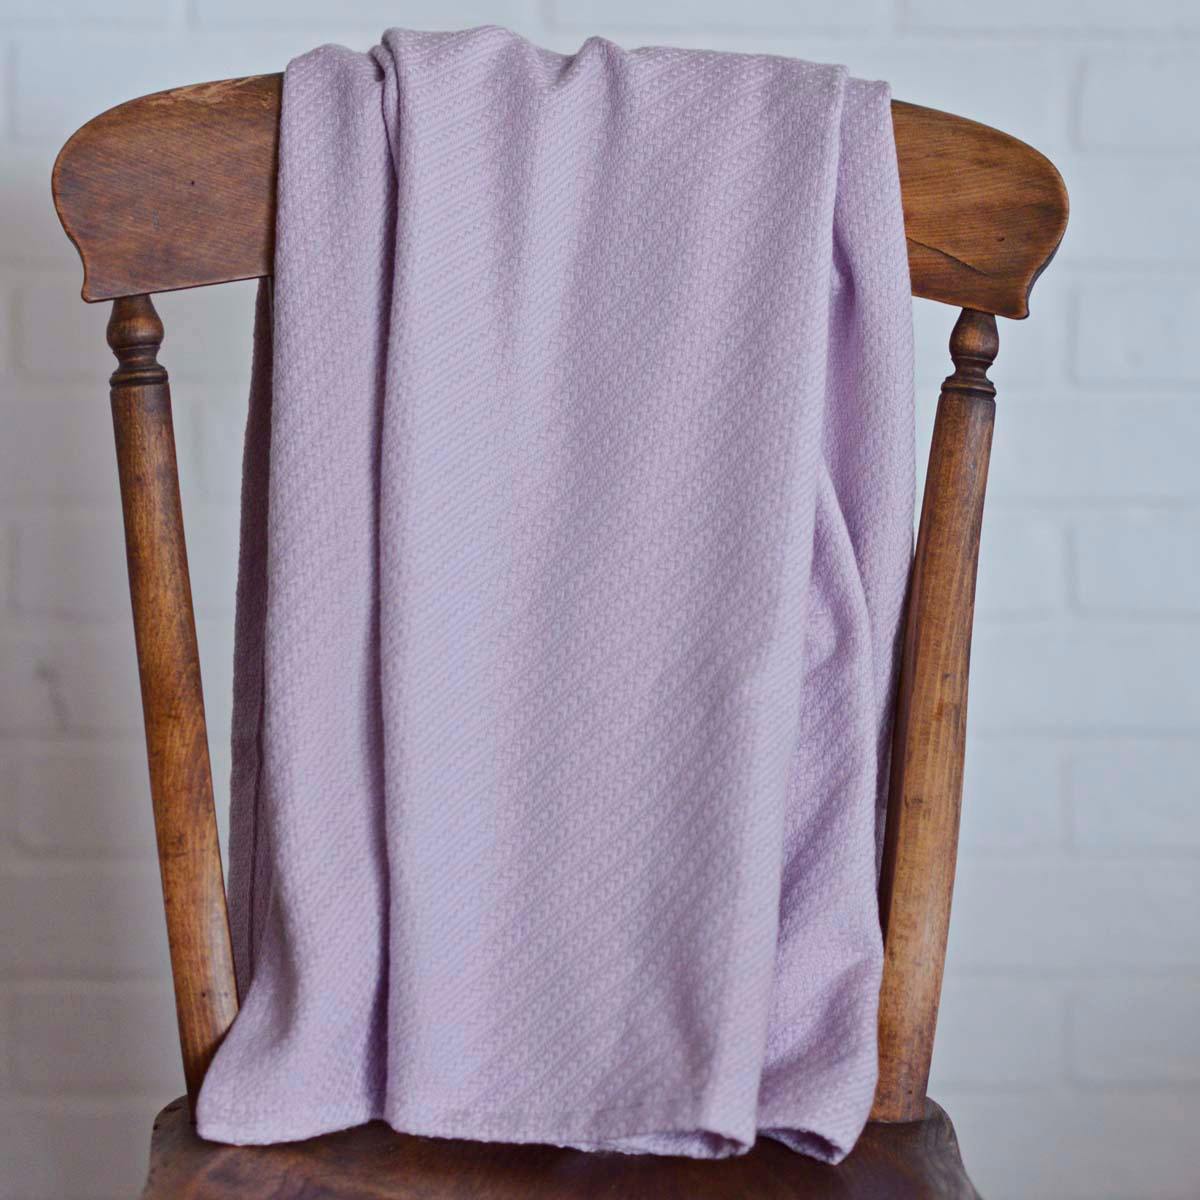 Lilac Baby Blanket 48x36 VHC Brands - The Fox Decor